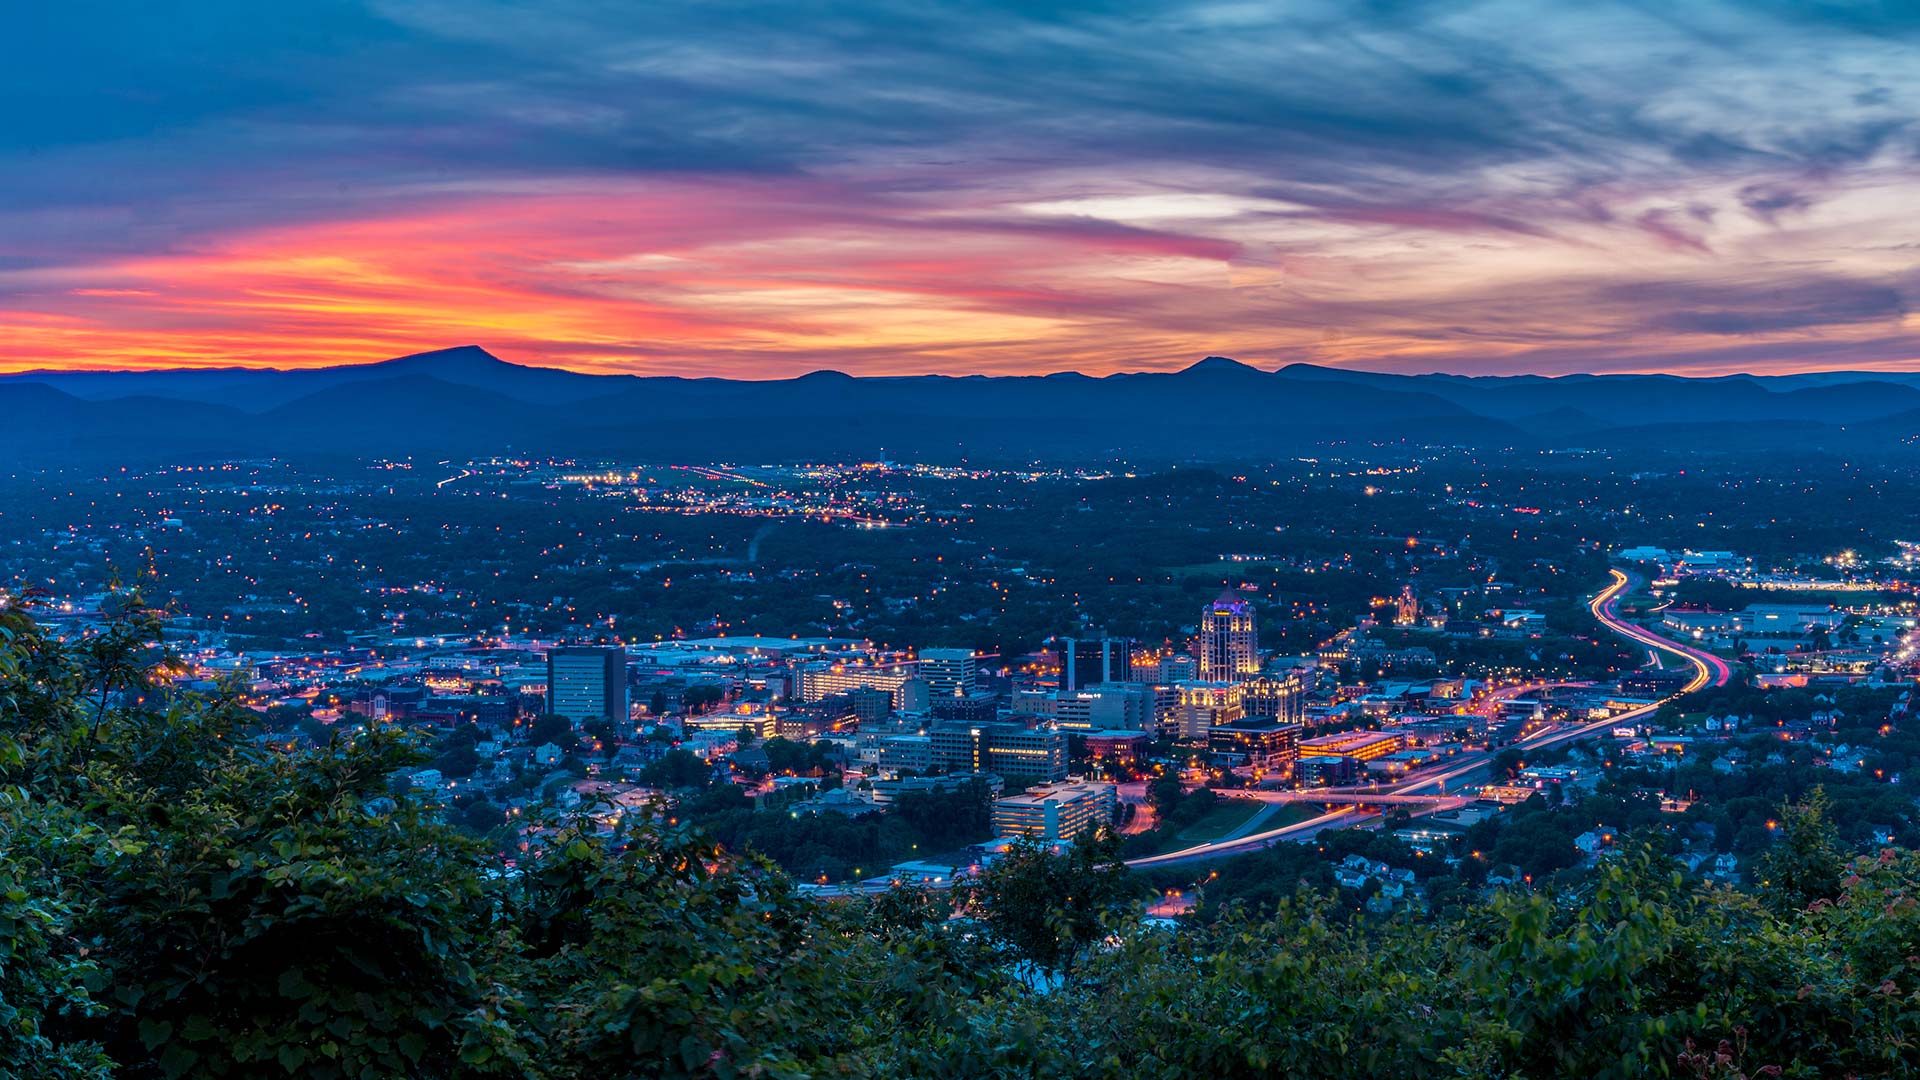 Panorama to illustrate dating in roanoke